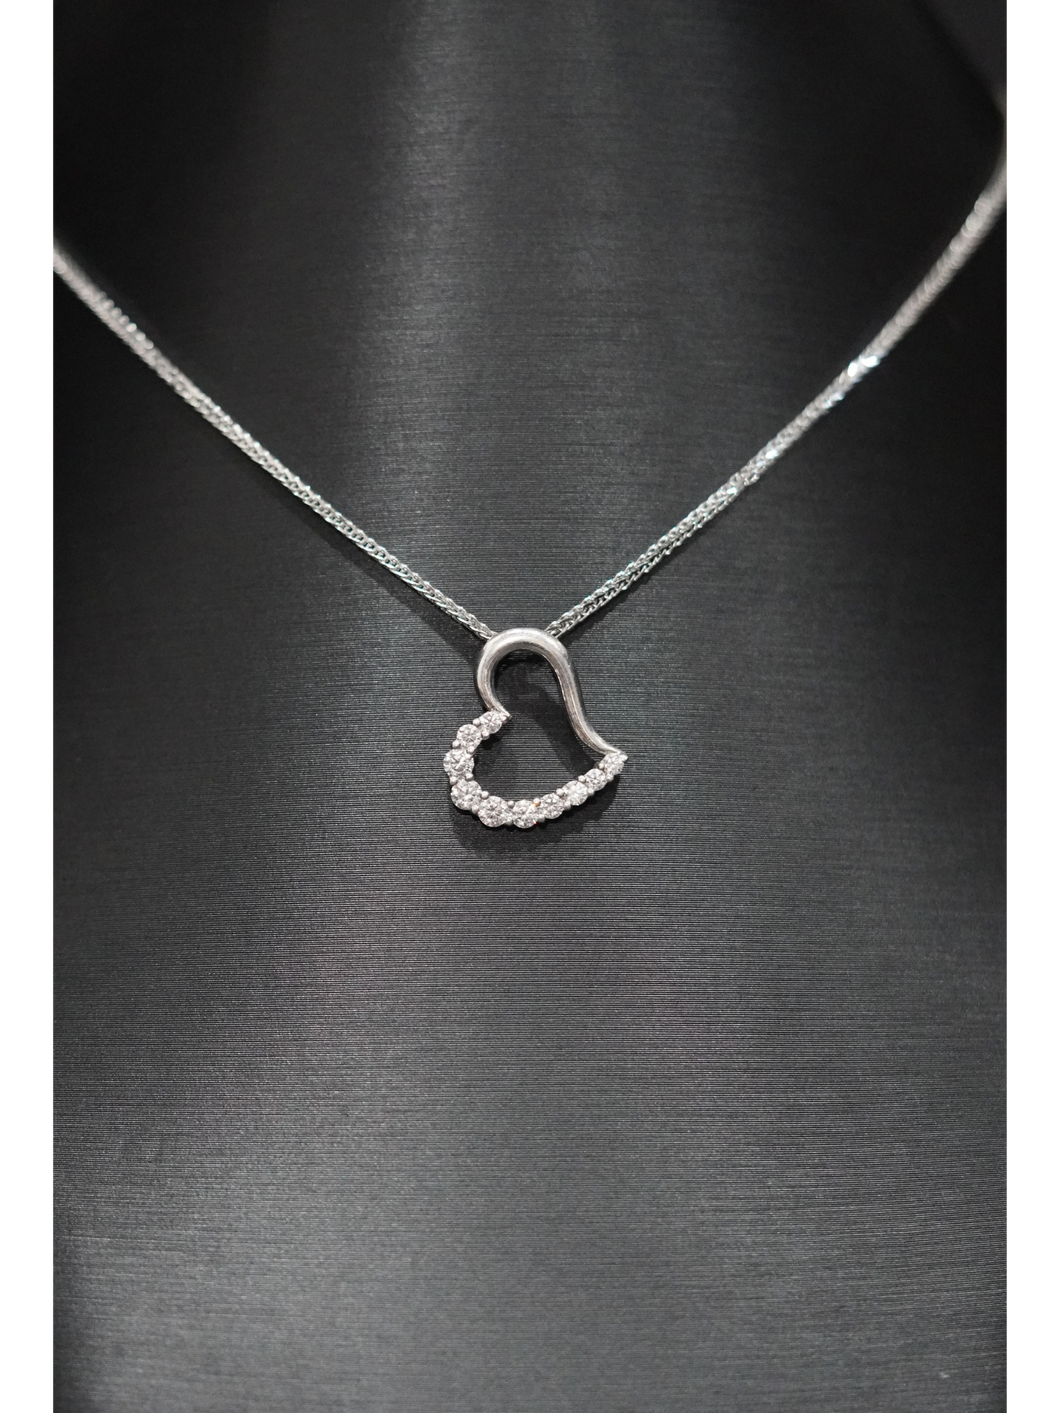 Hanging White Gold Heart